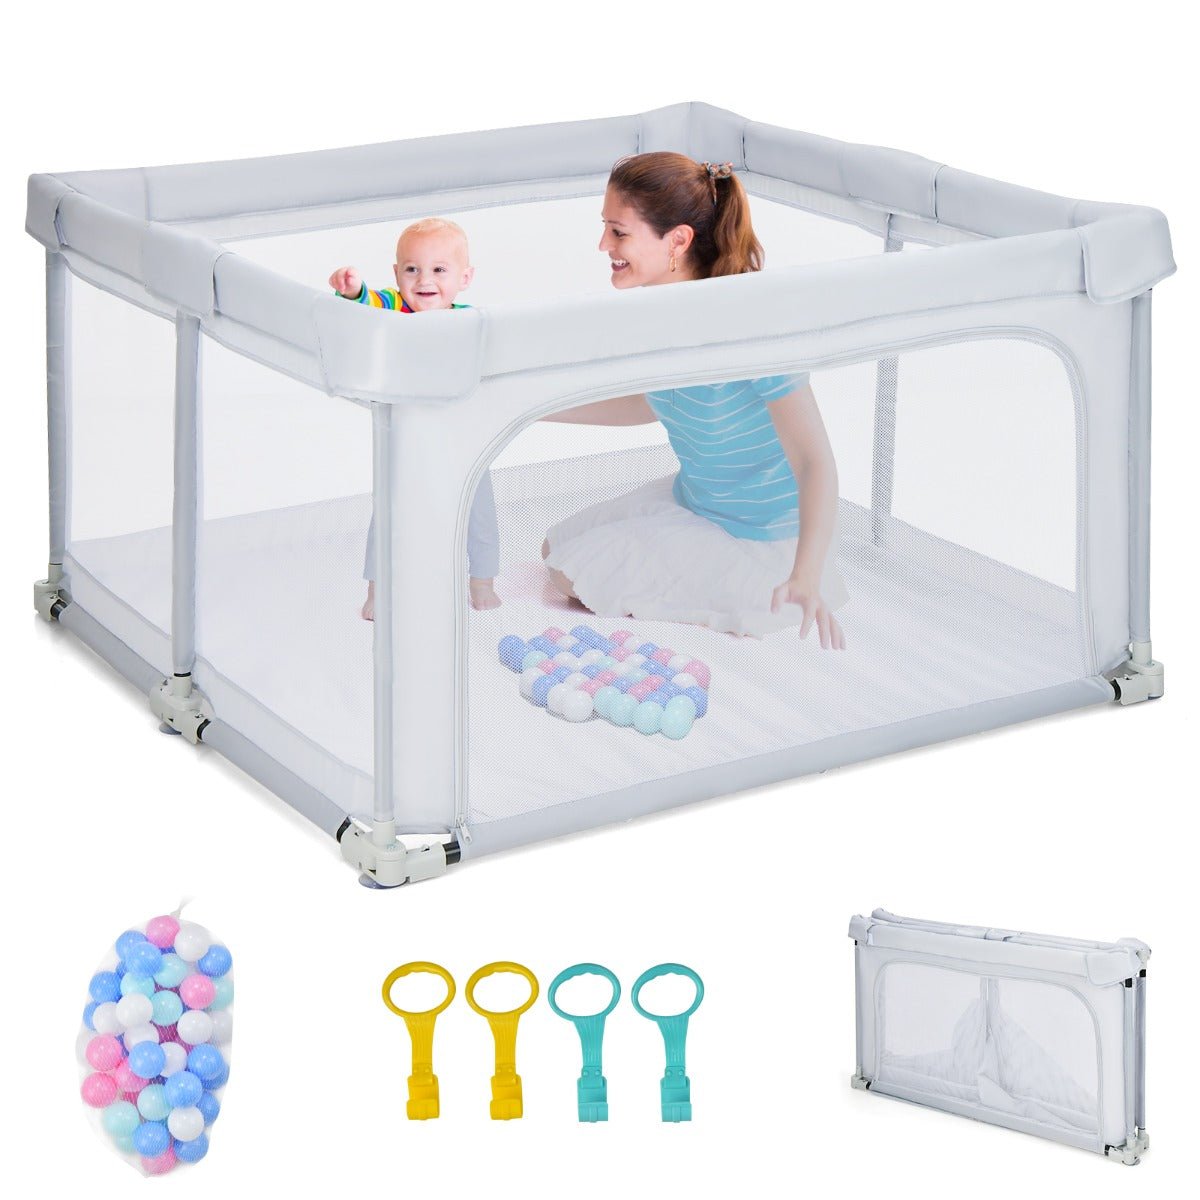 Foldable Playpen: 124cm Interactive Activity Center with Balls and Pull Rings